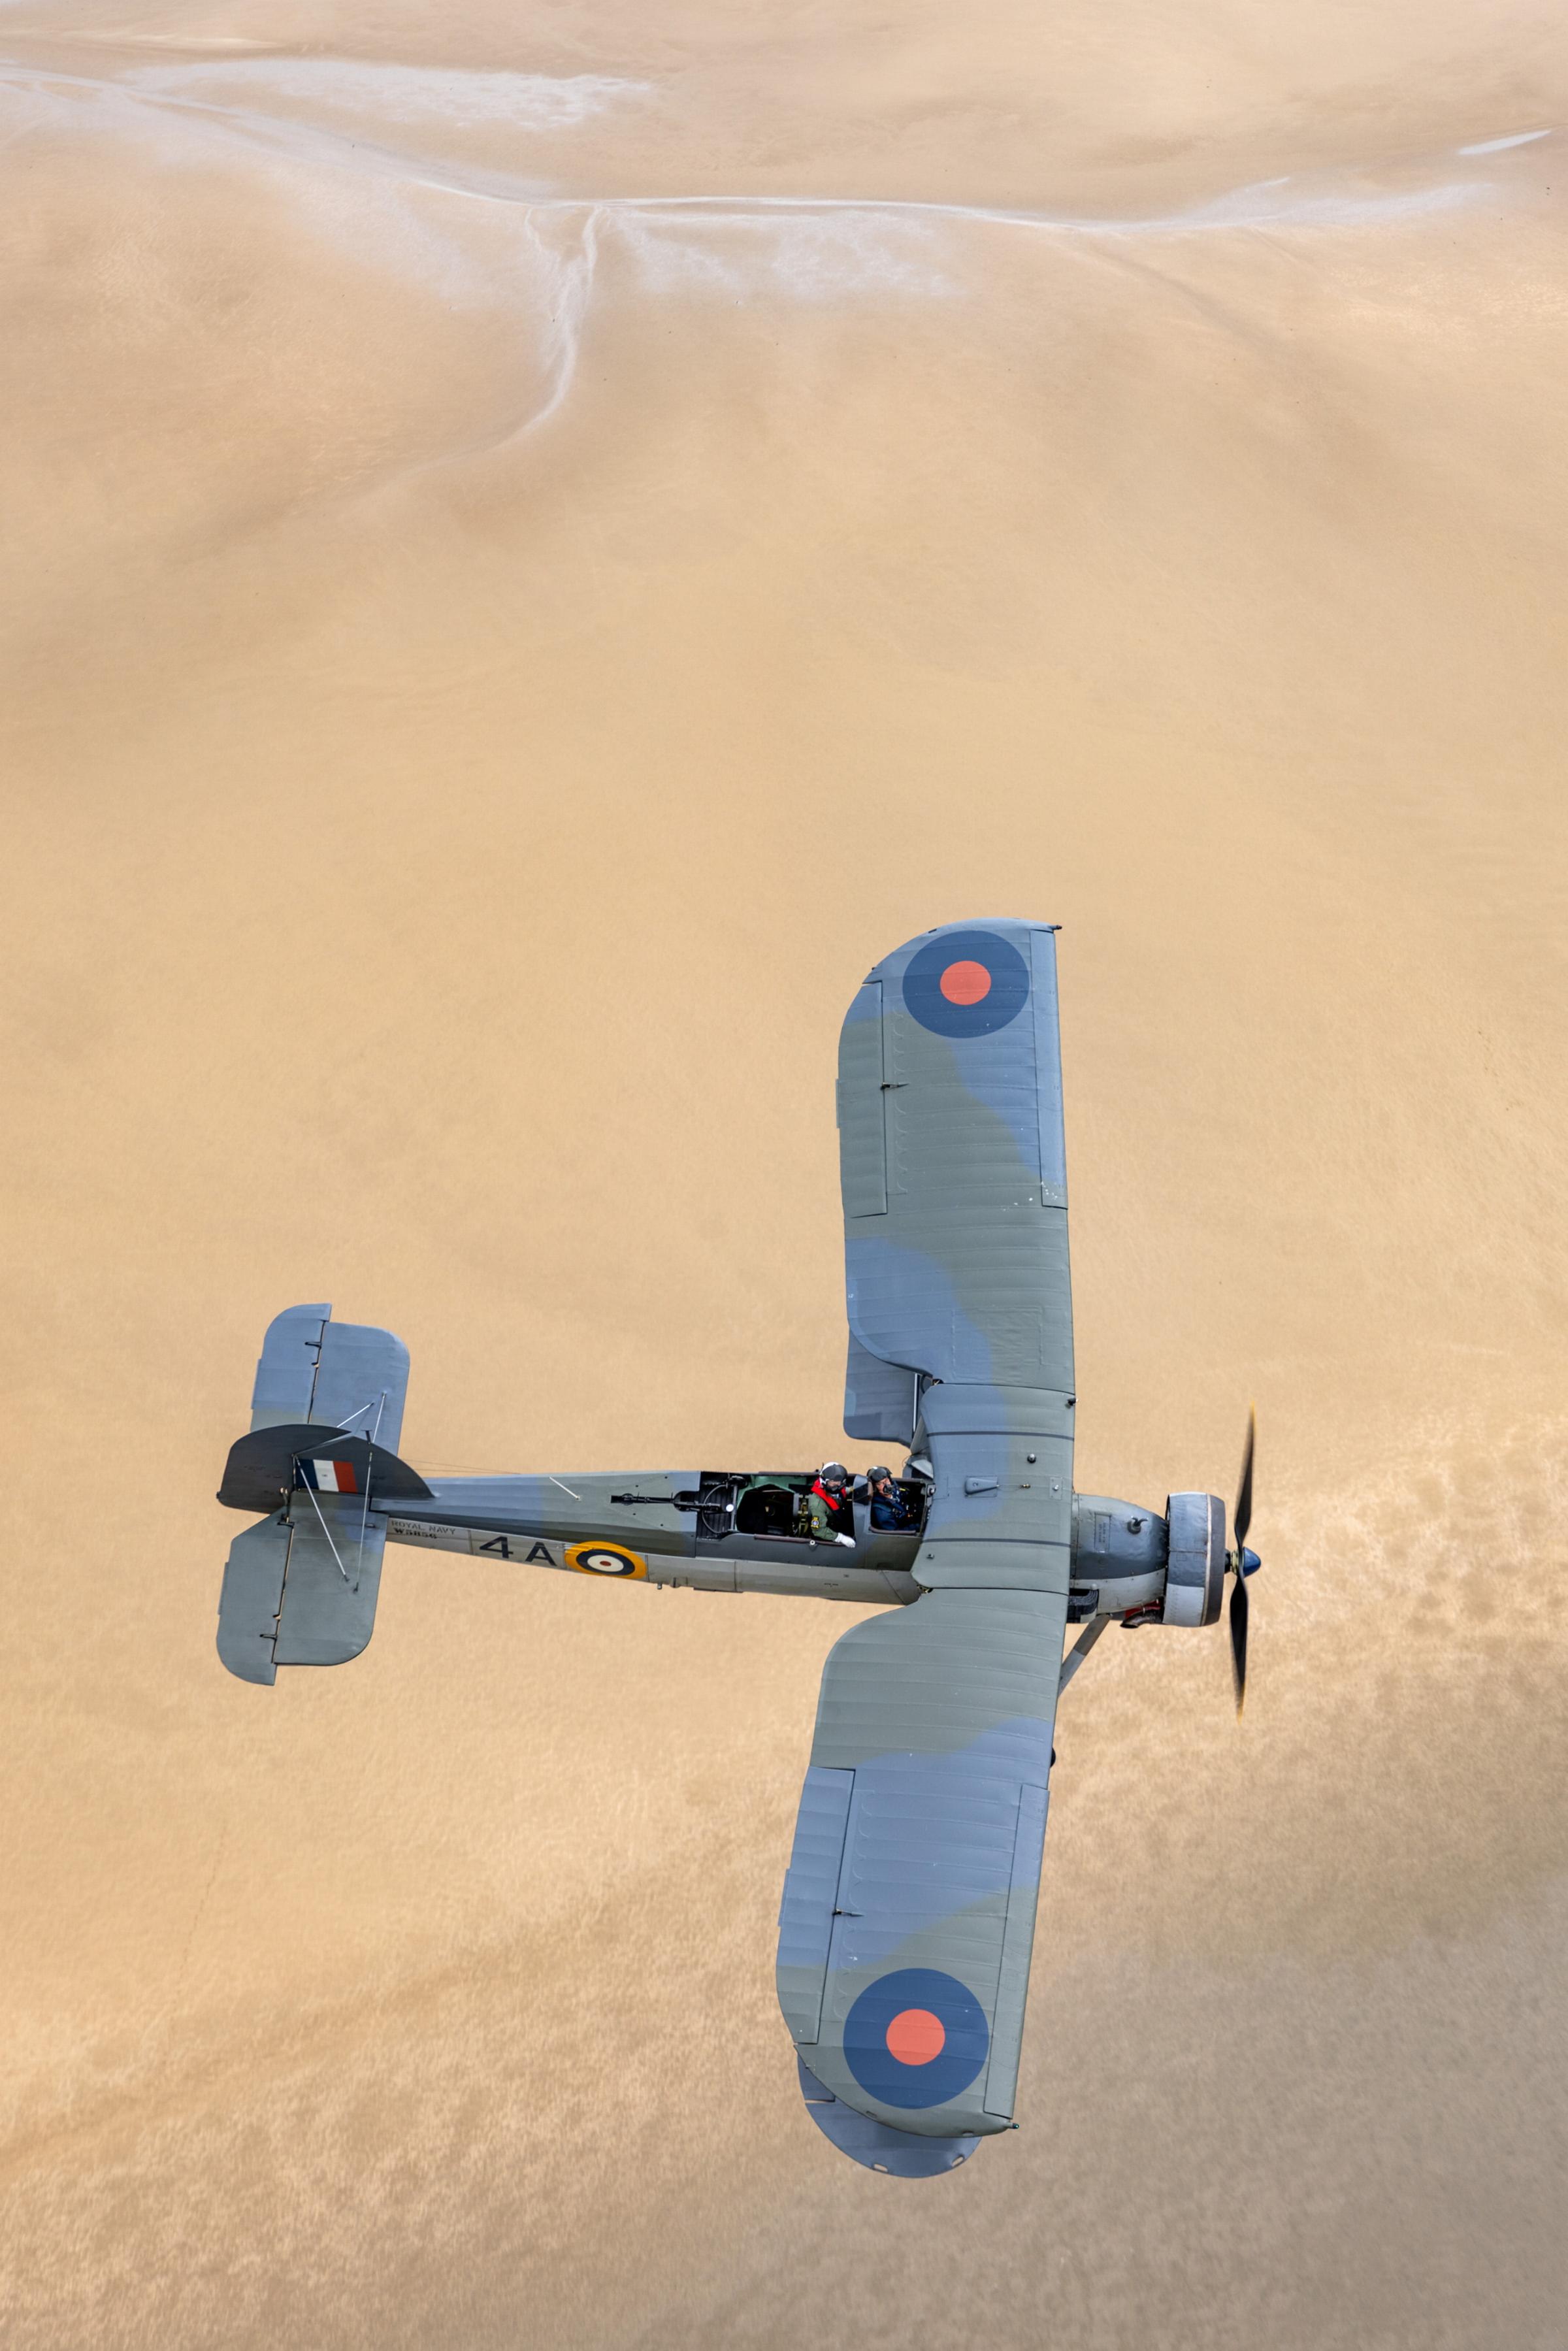 Incredible pictures captured on Friday (11 Aug) show the Navy Wings Swordfish Warbird airplane, W5856, as it participated in the annual RAF Valley Families Day.